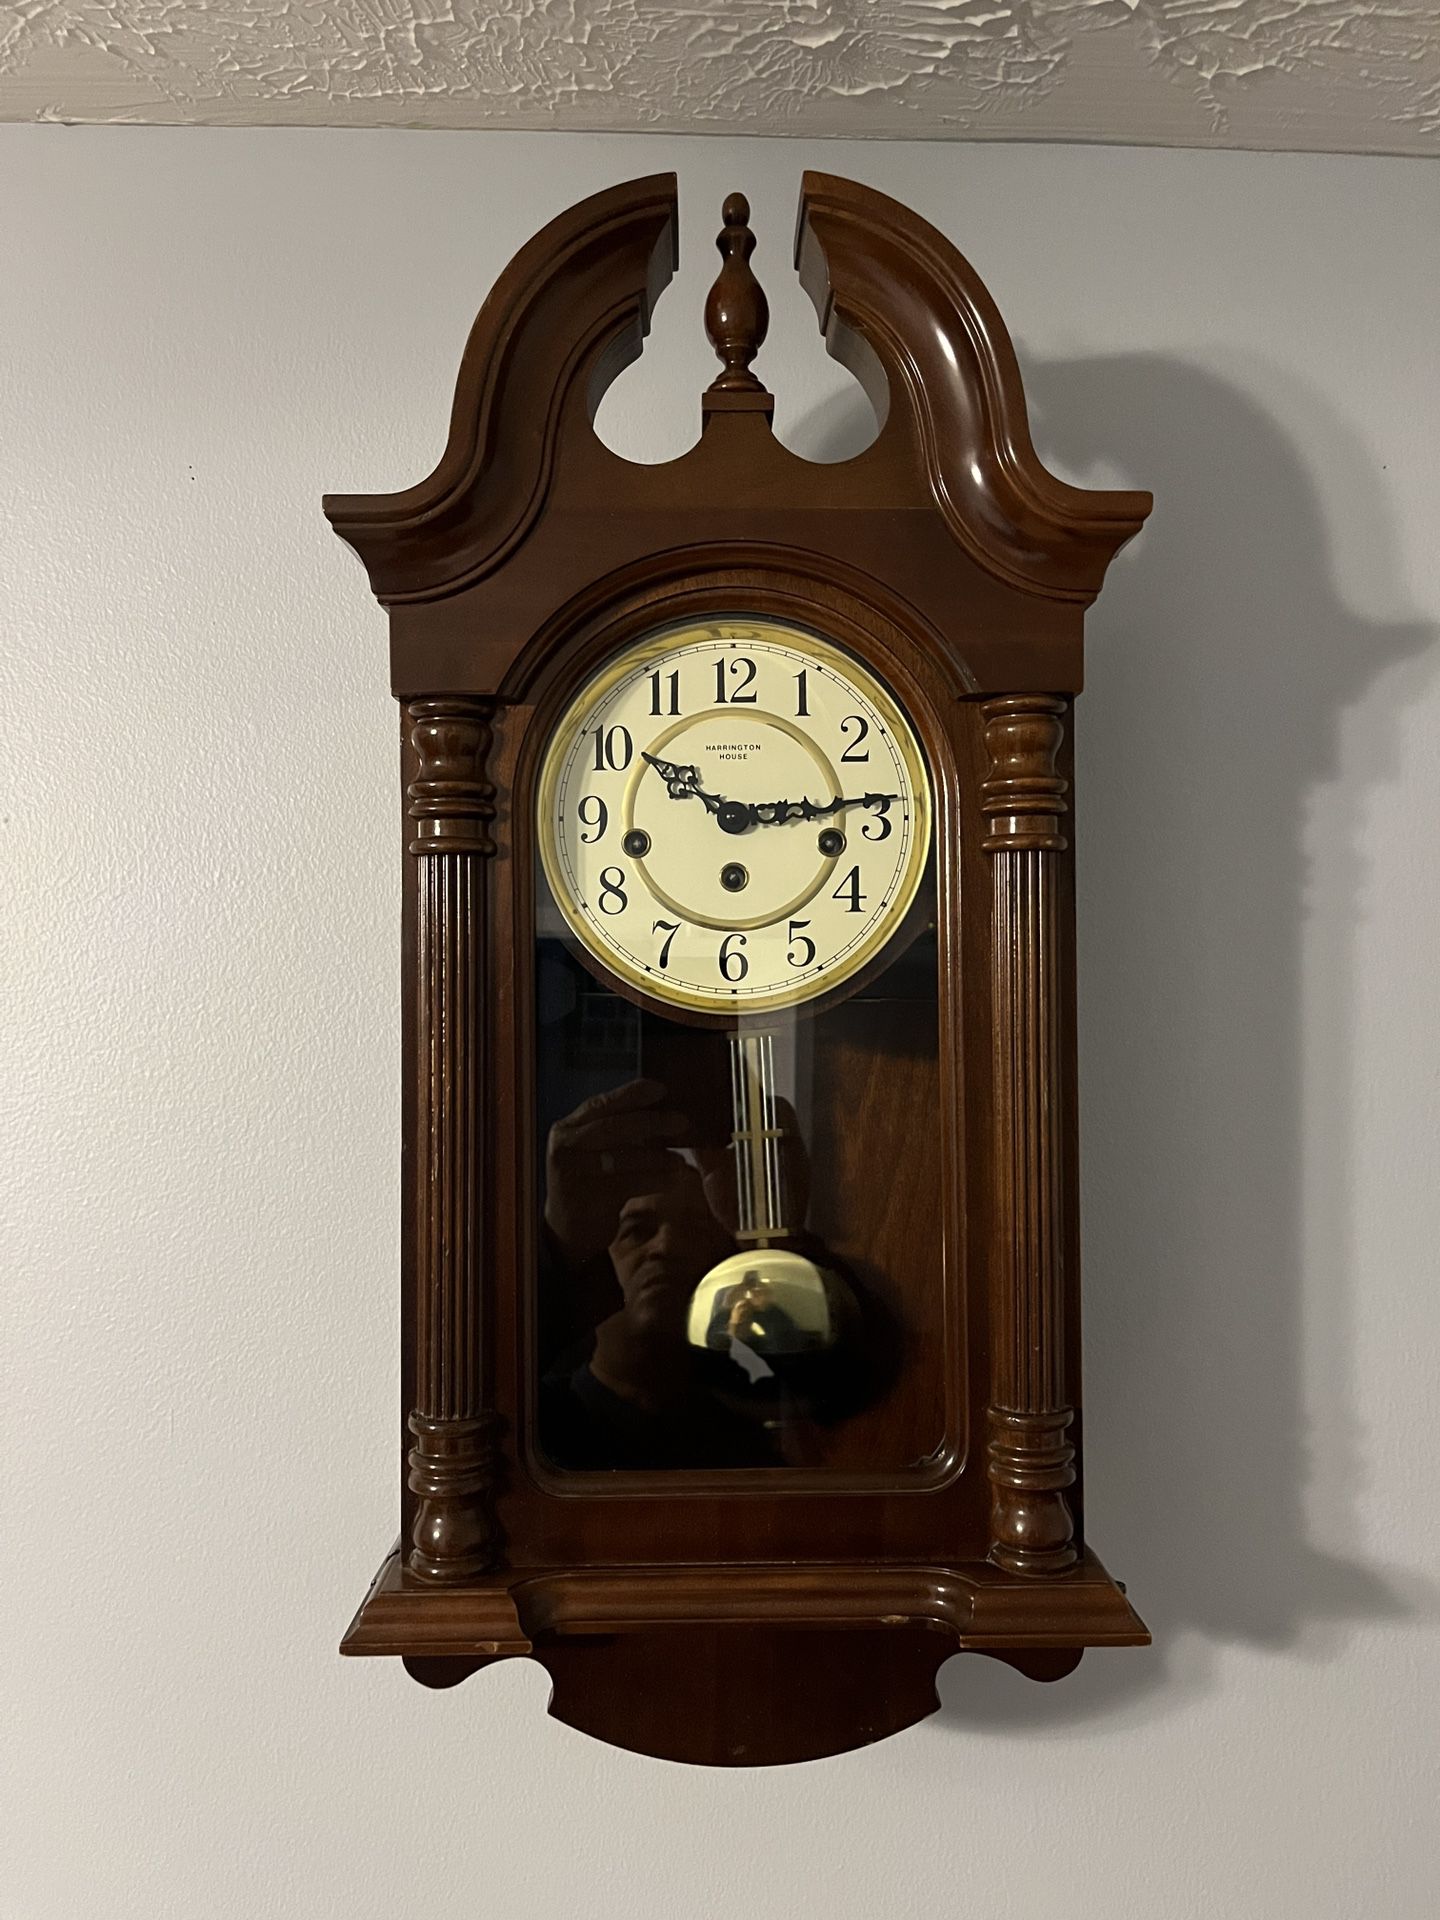 Antique Harrington House Wall Clock ( Chimes every 15 minutes and on the hour)